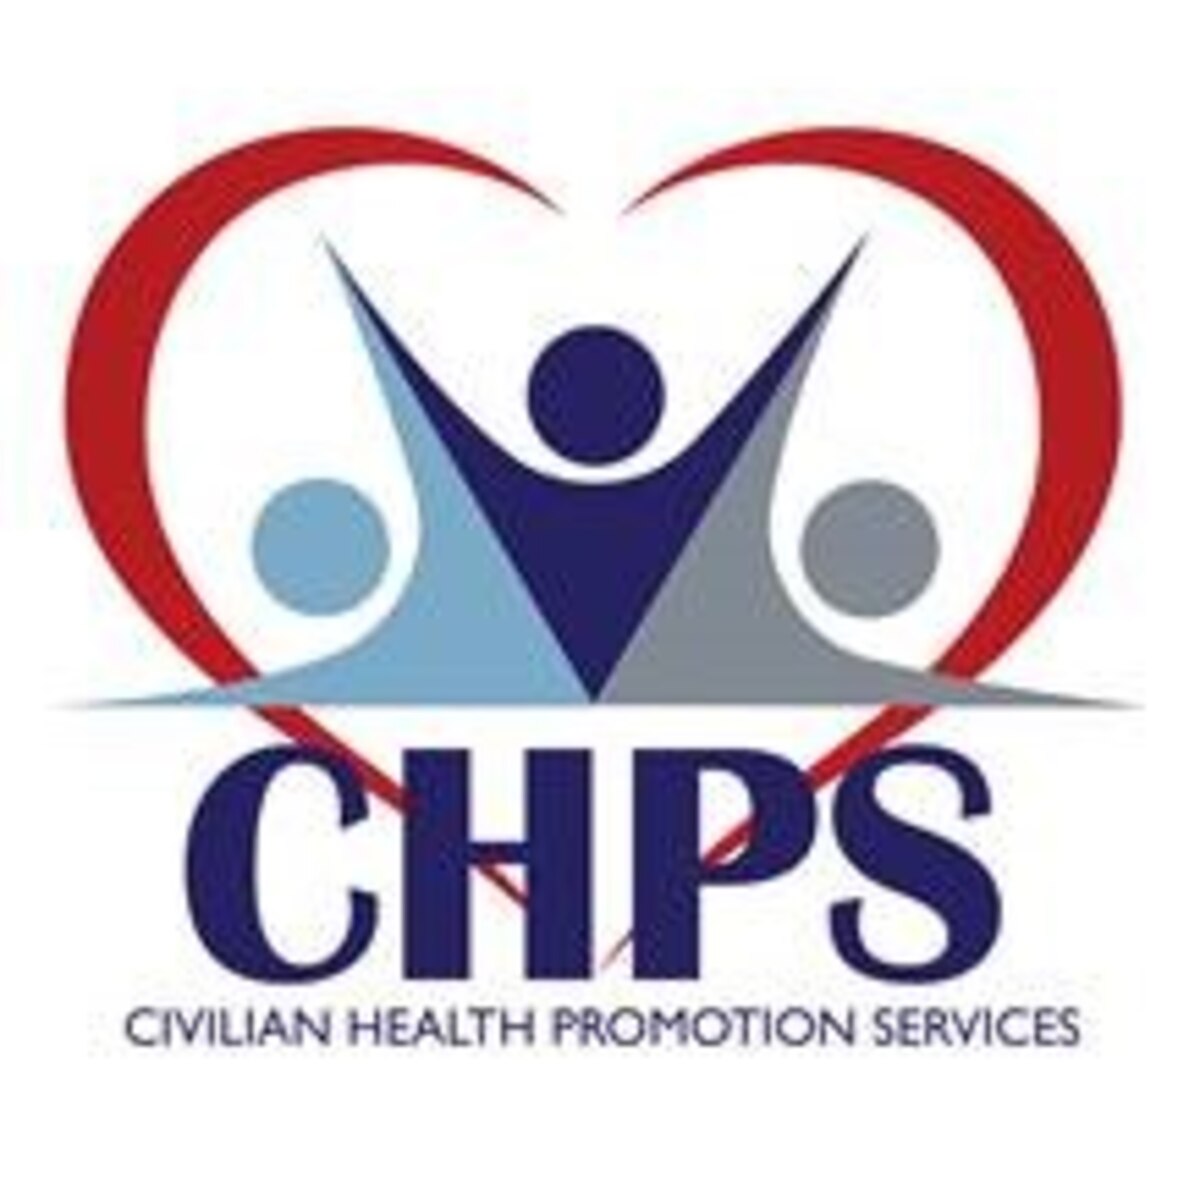 Civilian Health Promotion Services helps keep civilians in